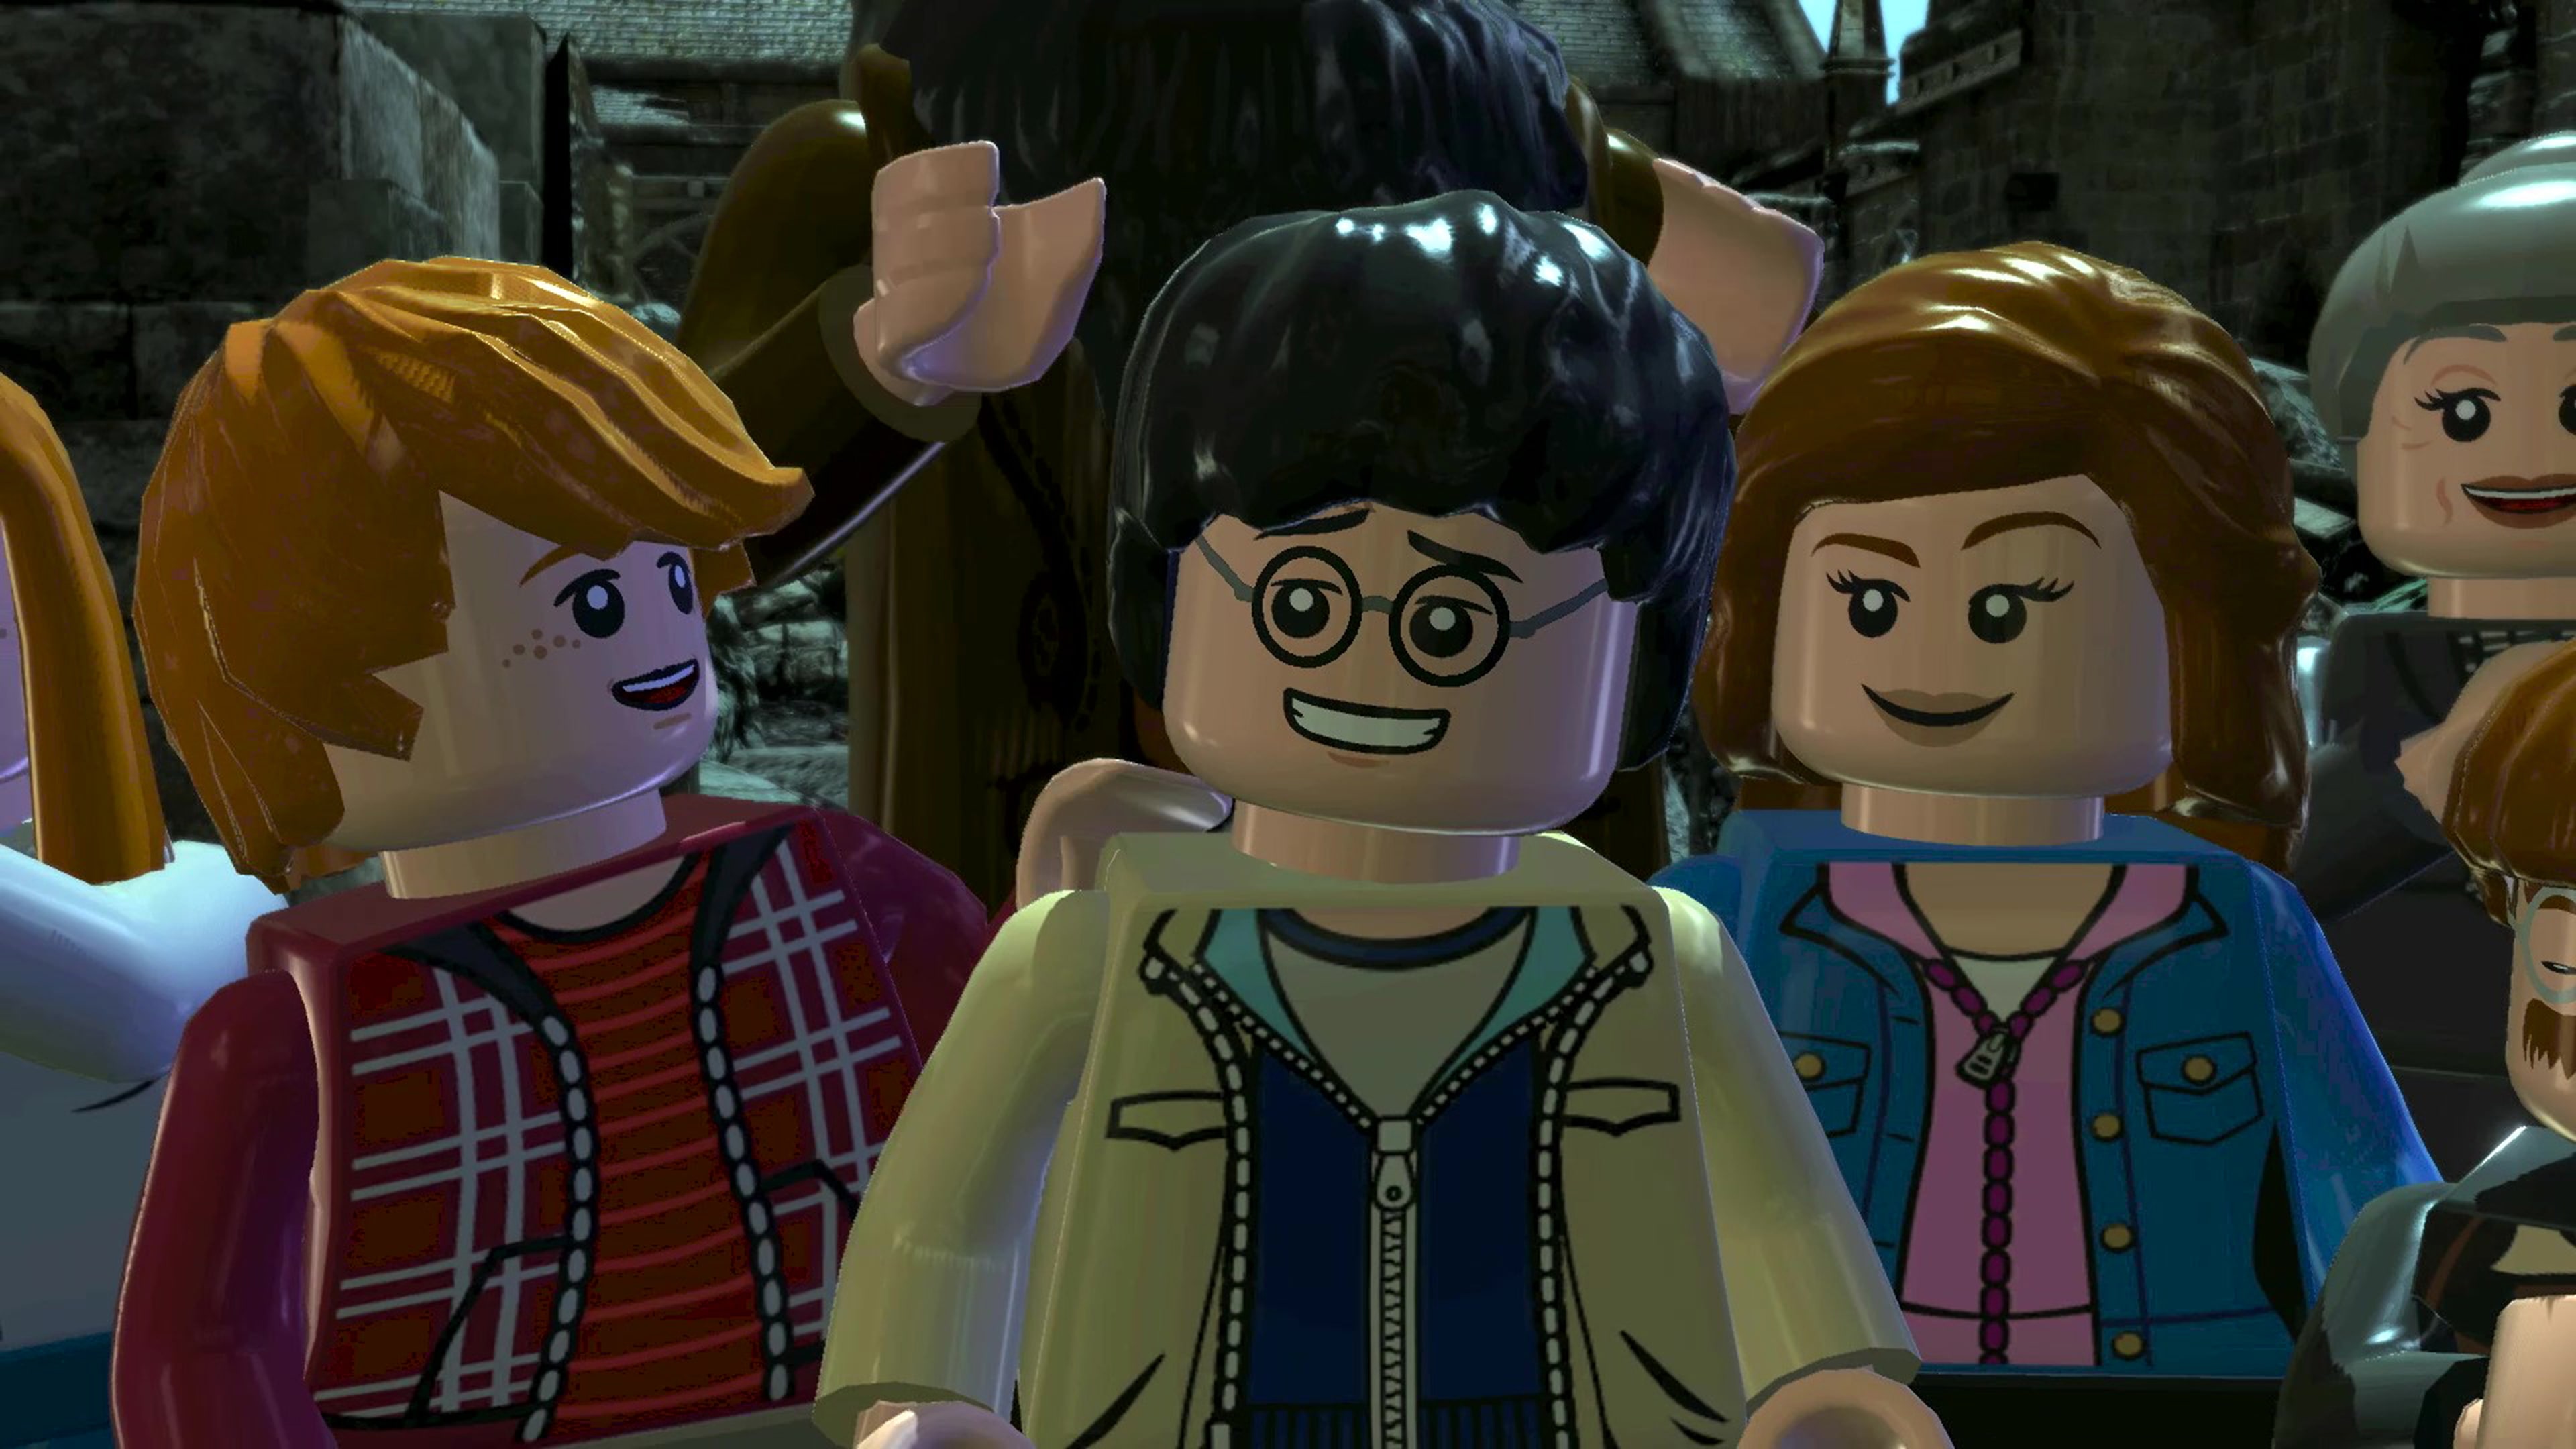 Lego Harry Potter Collection Years 1-4 & 5-7 PS4 